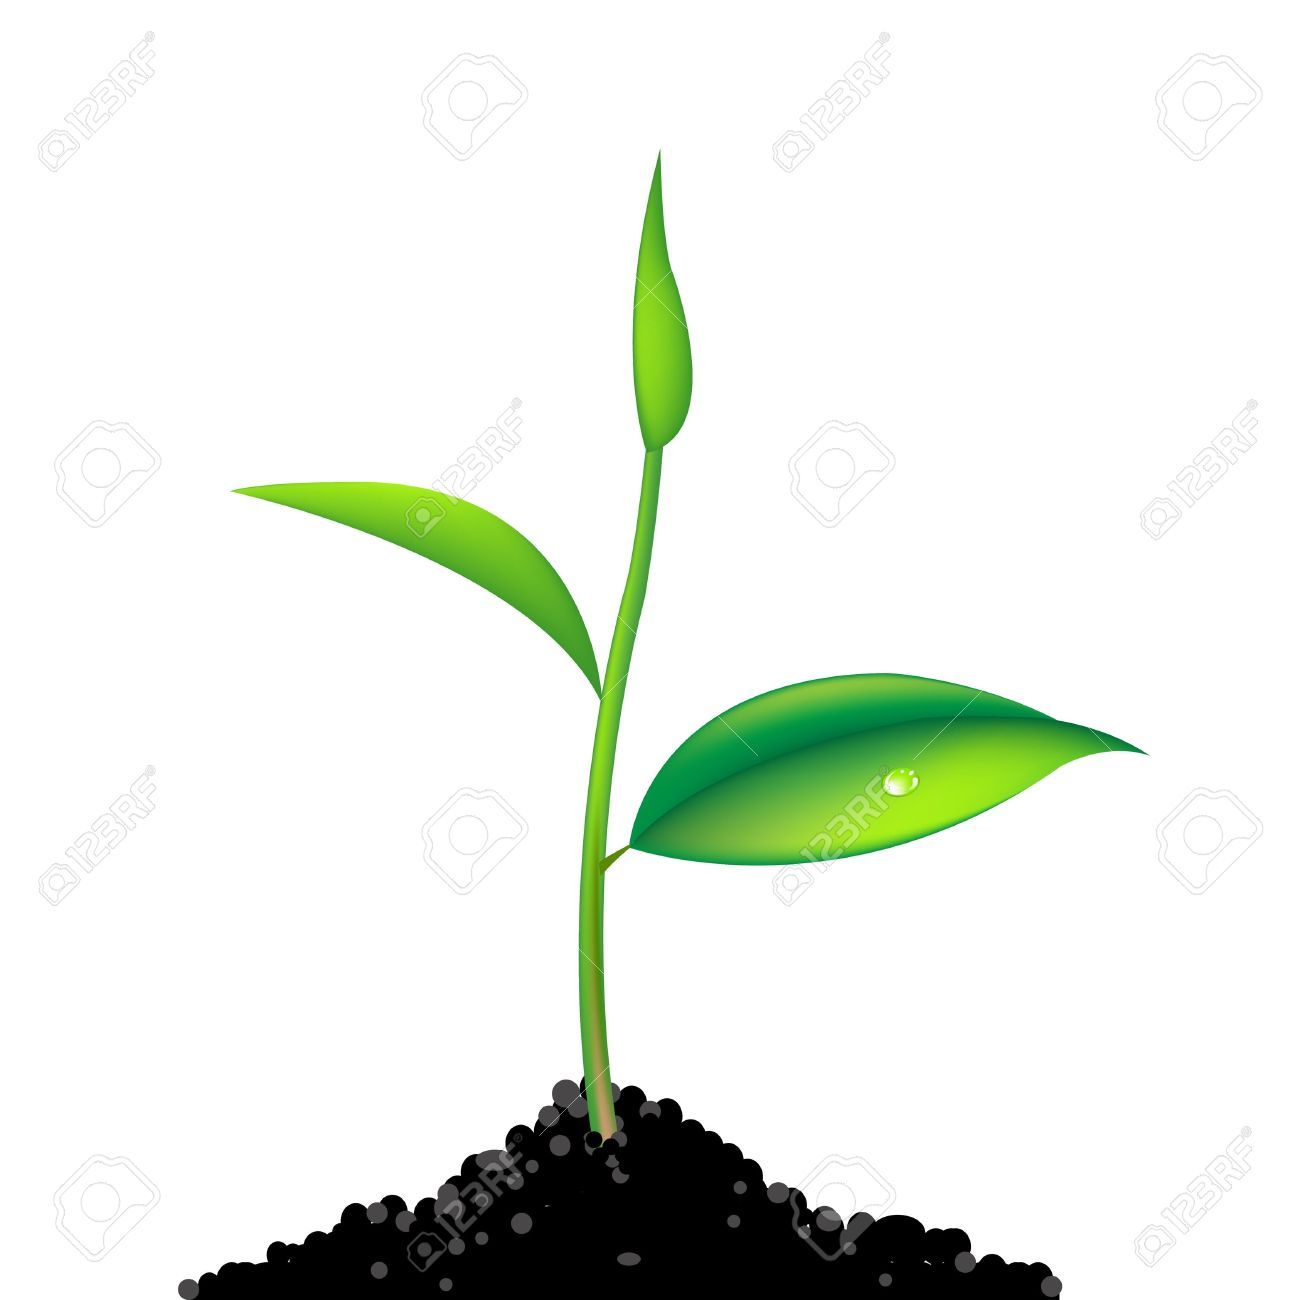 Planting clipart sprout. Plant google search paddle